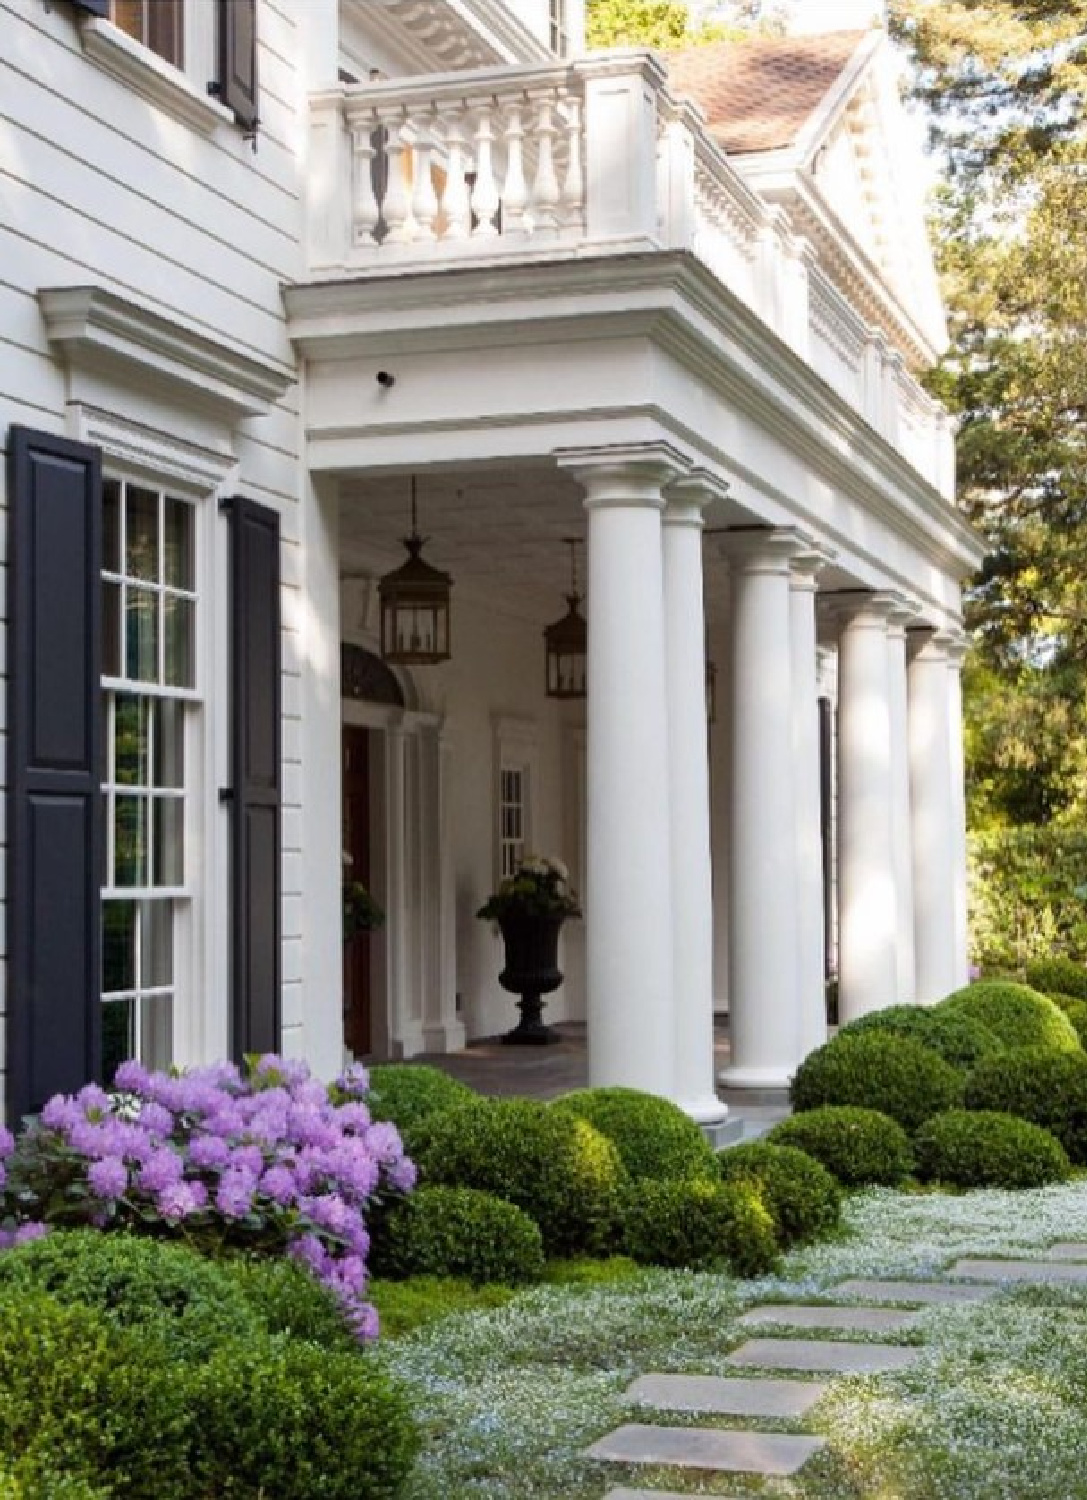 @charliebarnettassociates and @elizabetheverdellgardendesign - Stunning white house exterior with wide column entry and boxwood. #classicarchitecture #whitehouses #whitehouseexteriors